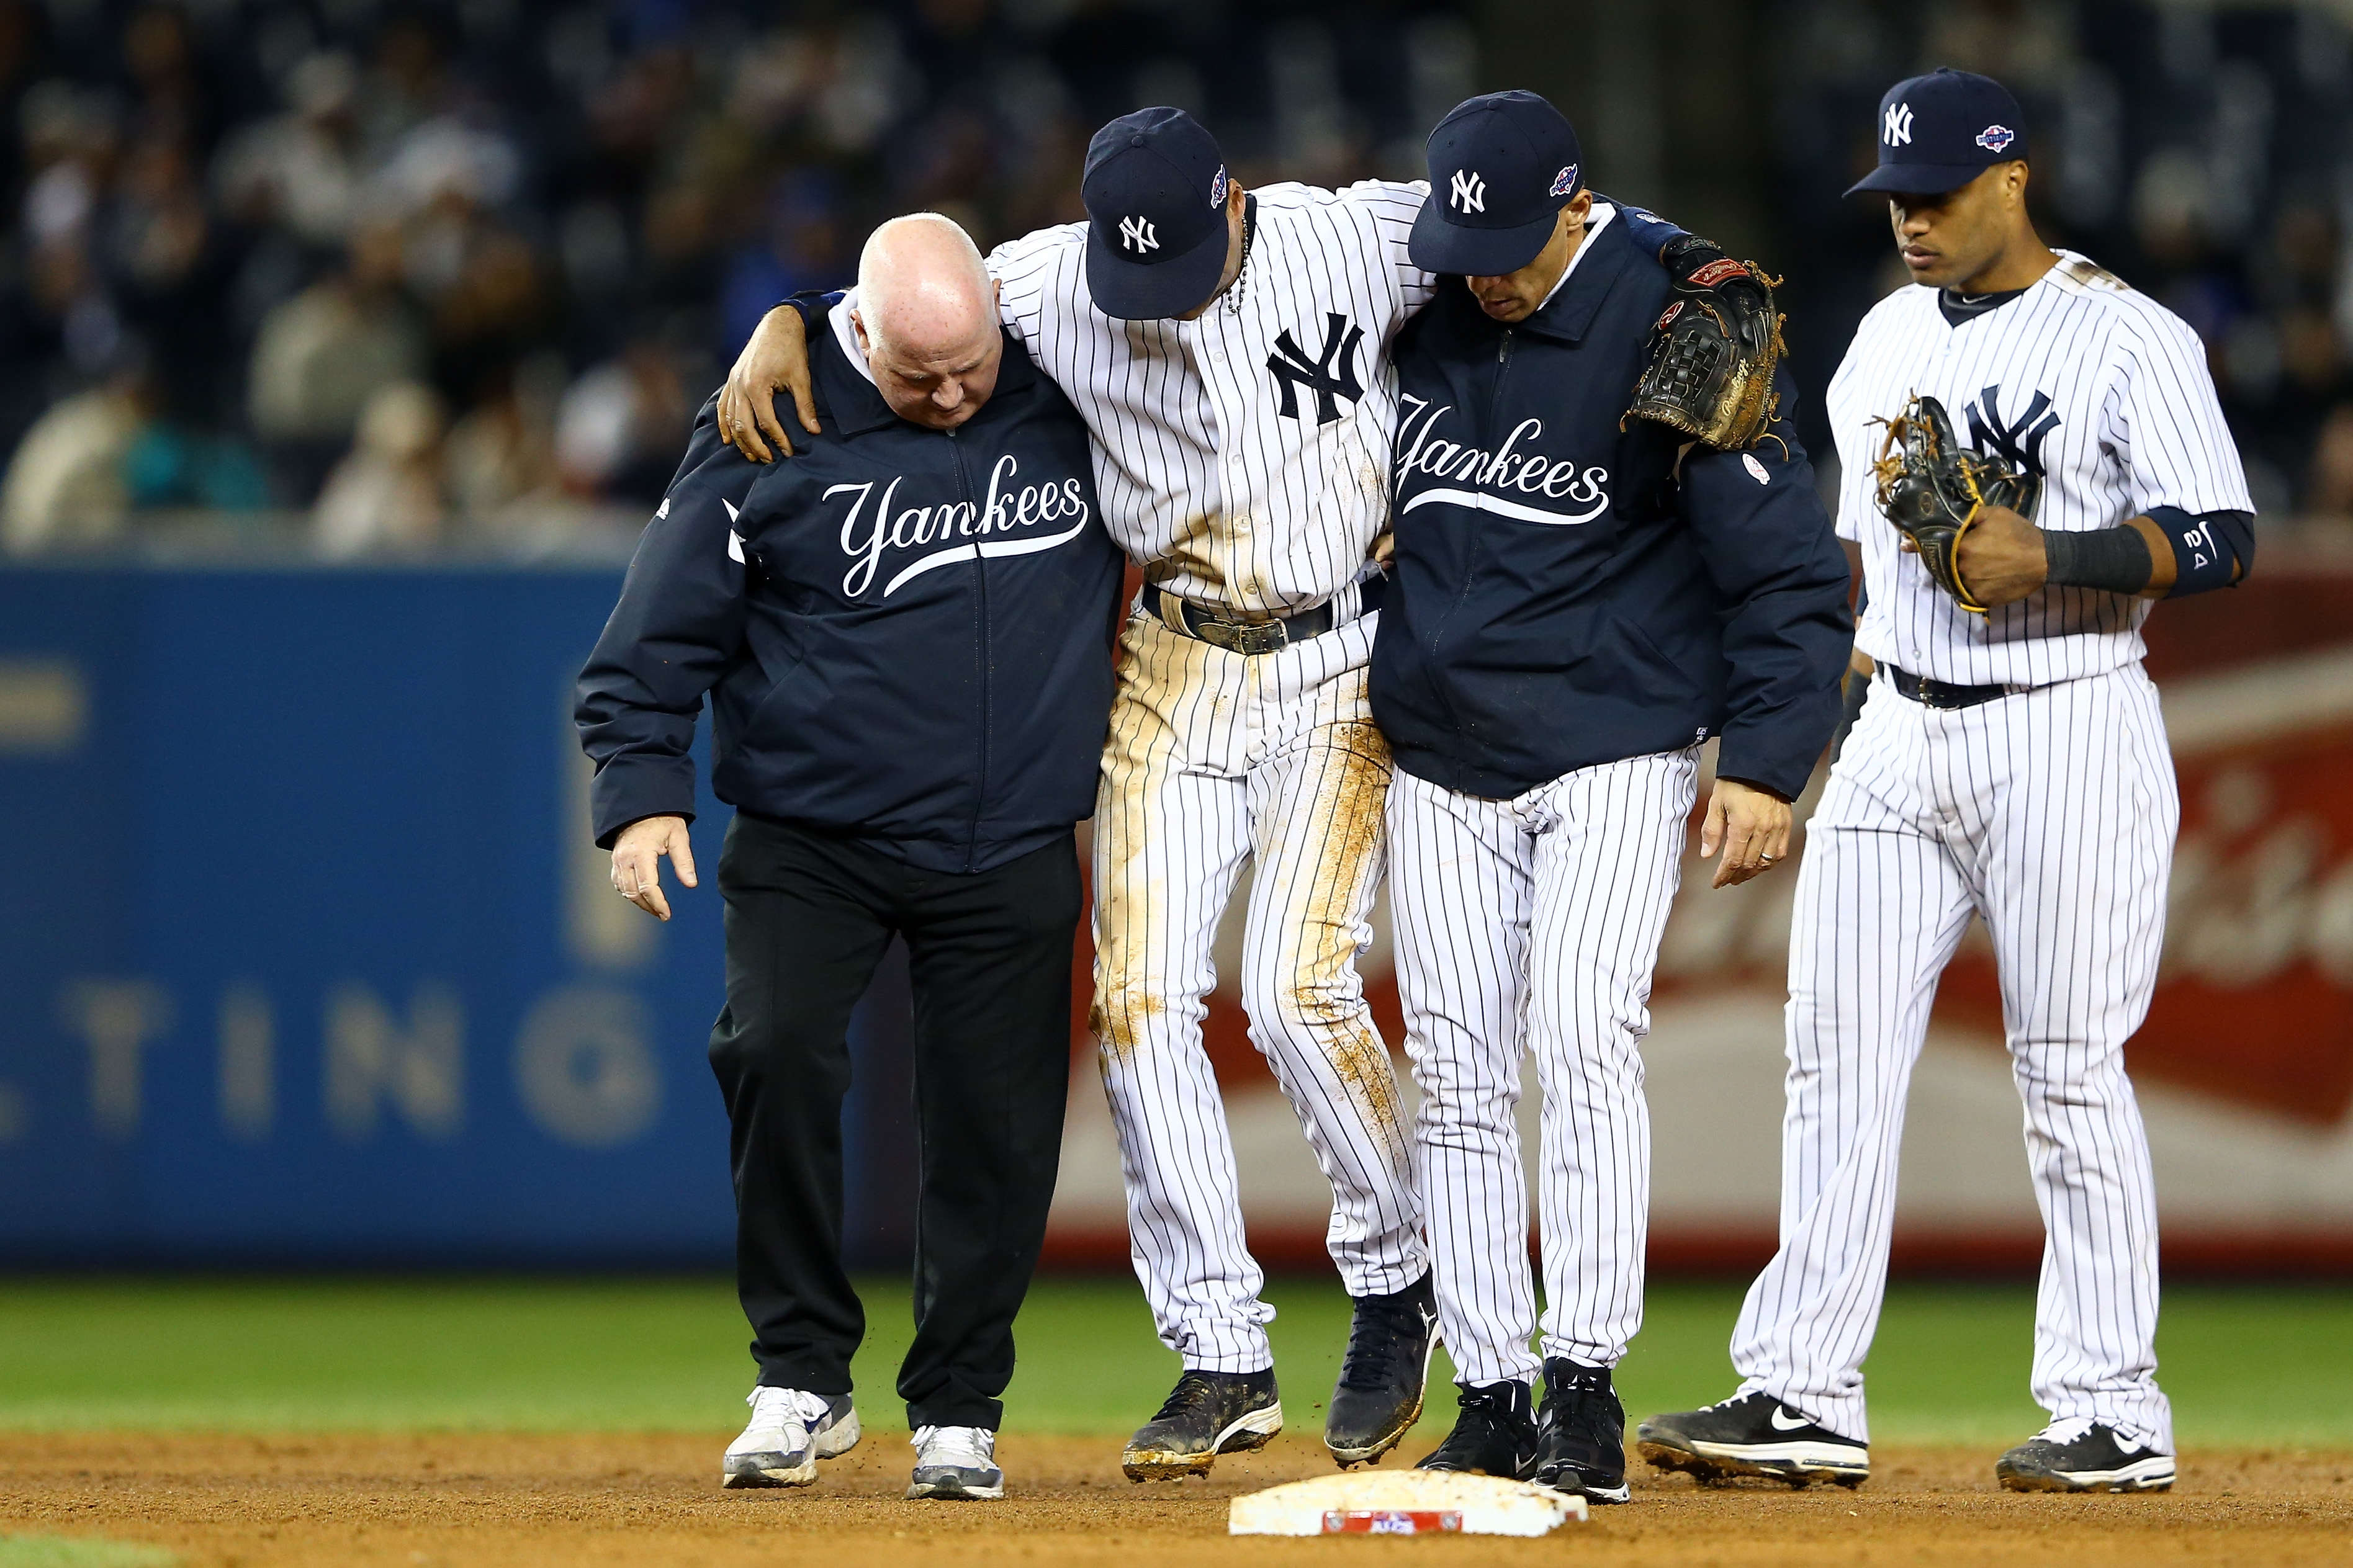 Derek Jeter helped off of the field by trainer Steve Donohue and manager Joe Girardi in the top of the 12th inning against the Detroit Tigers during Game 1 of the 2012 ALCS.  (Photo by Al Bello/Getty Images)